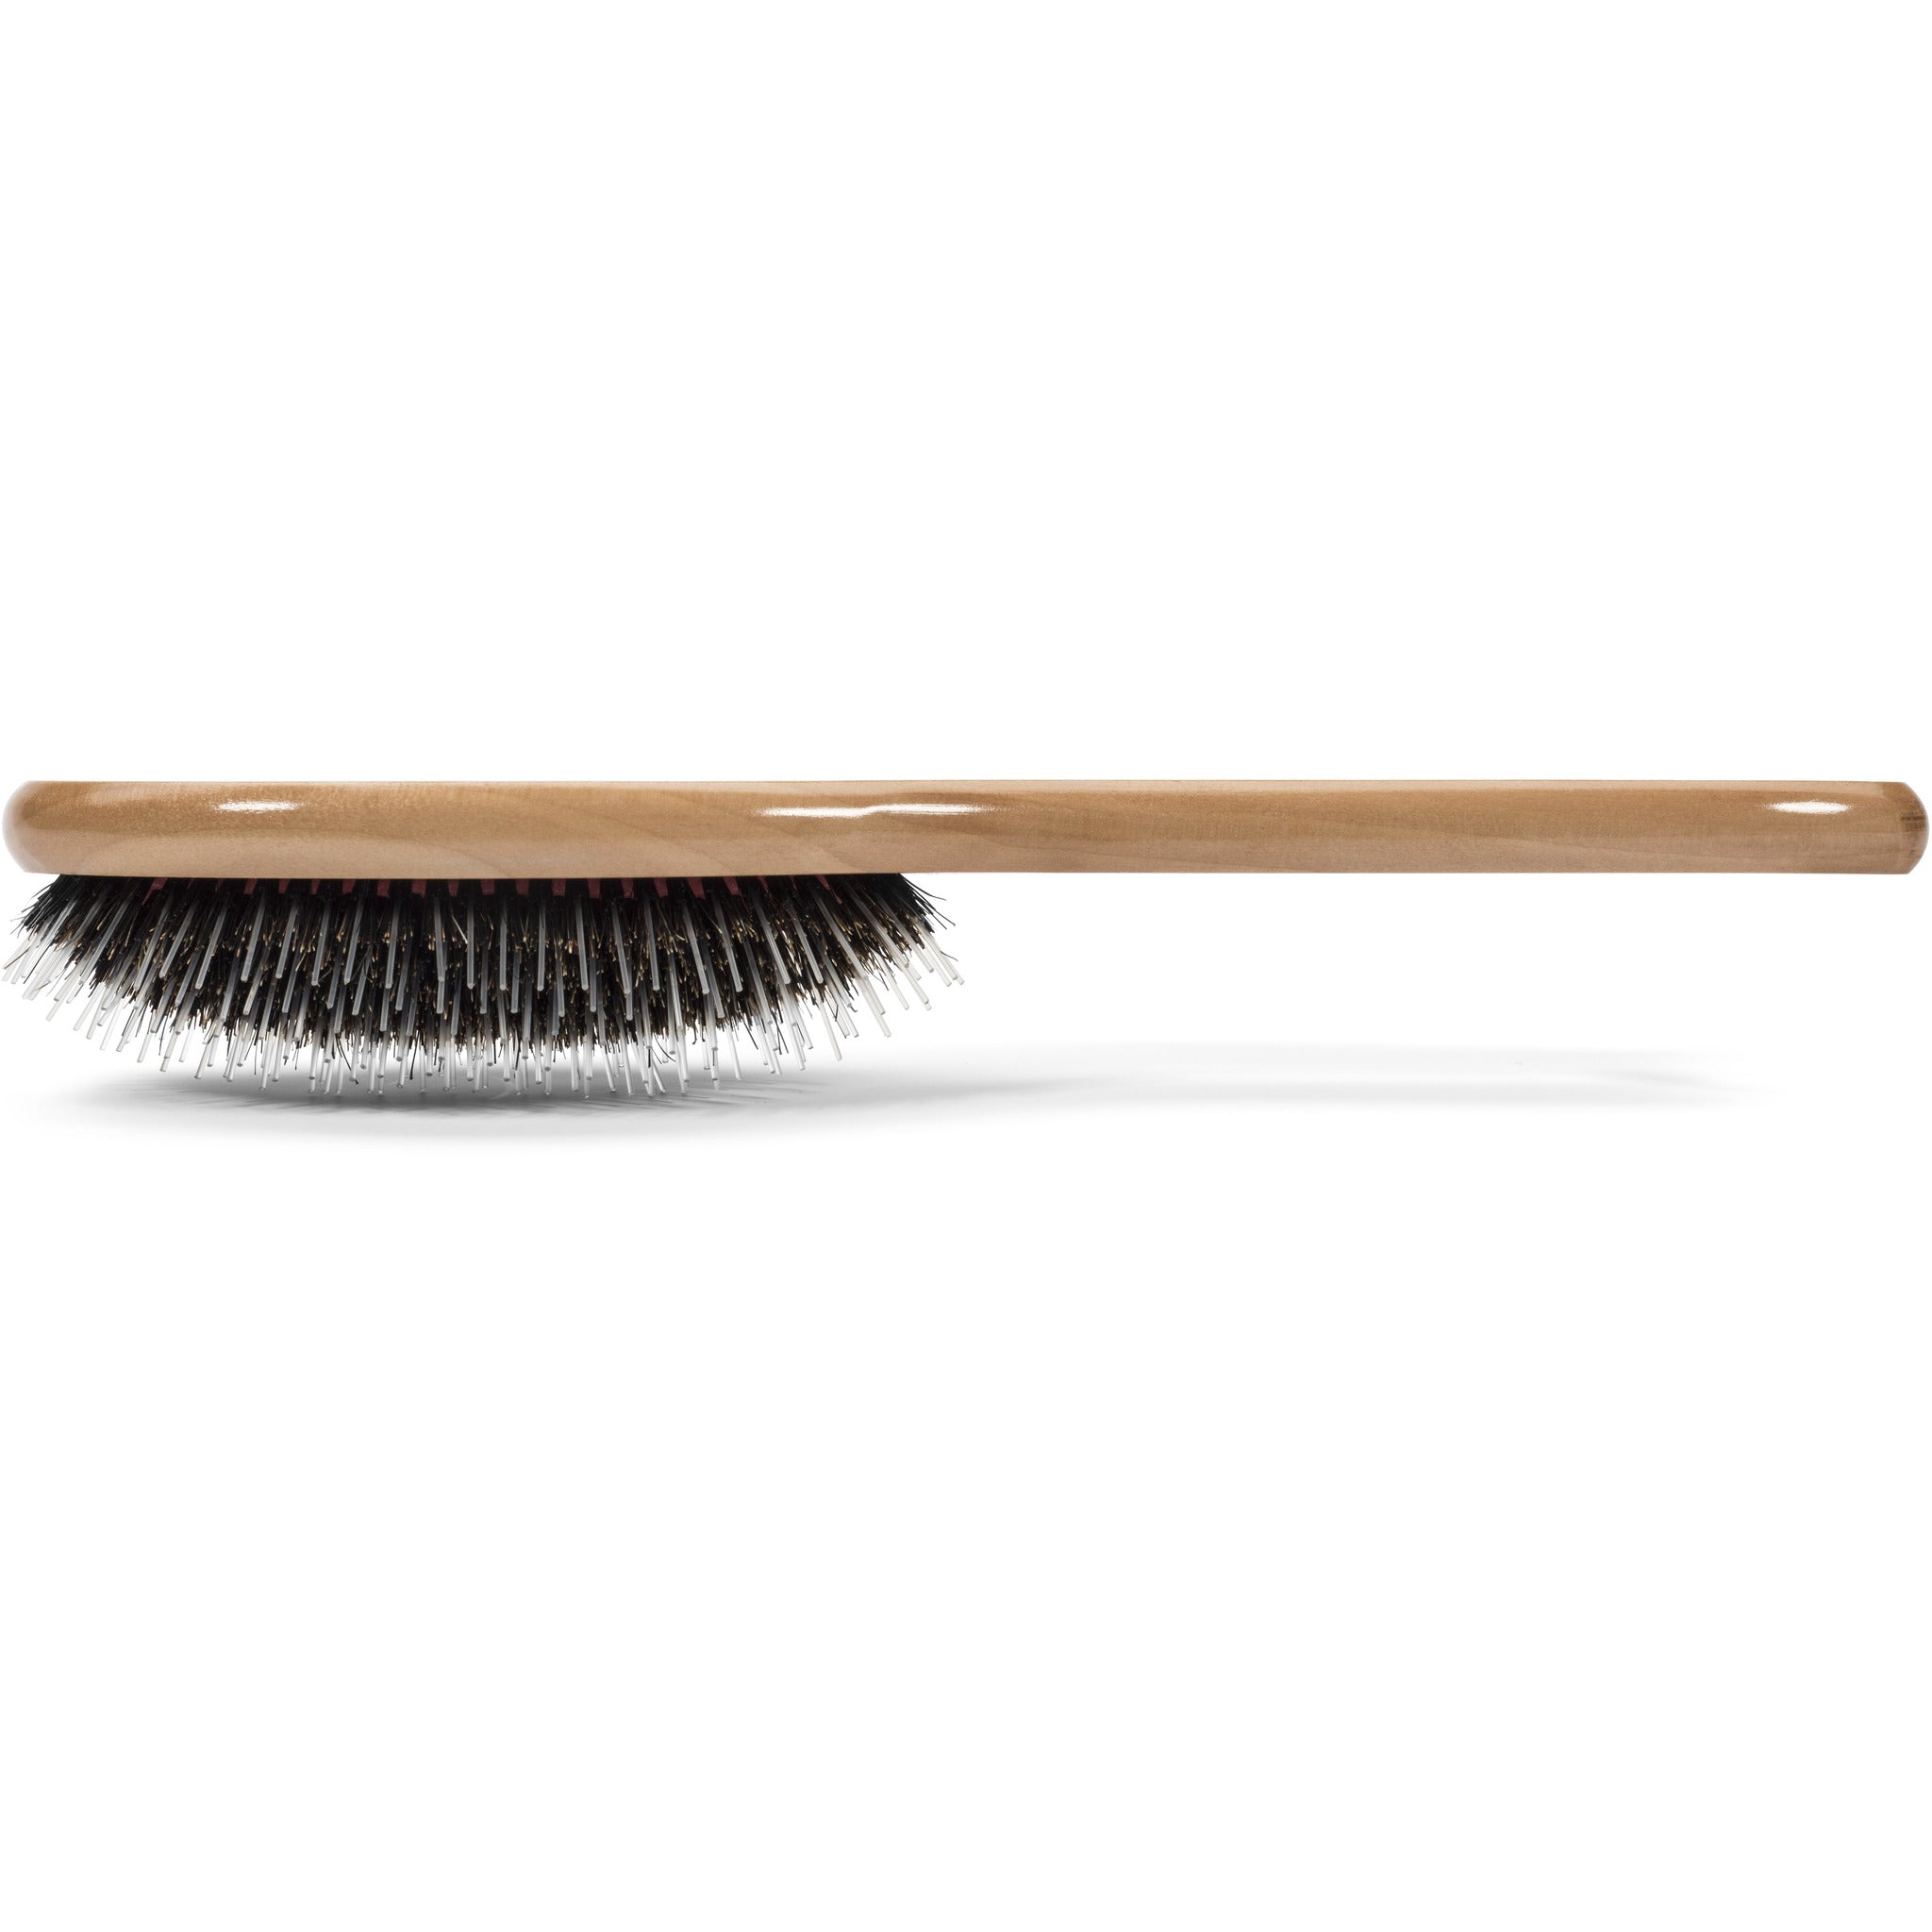 GranNaturals Boar + Nylon Bristle Oval Hair Brush with a Wooden Handle